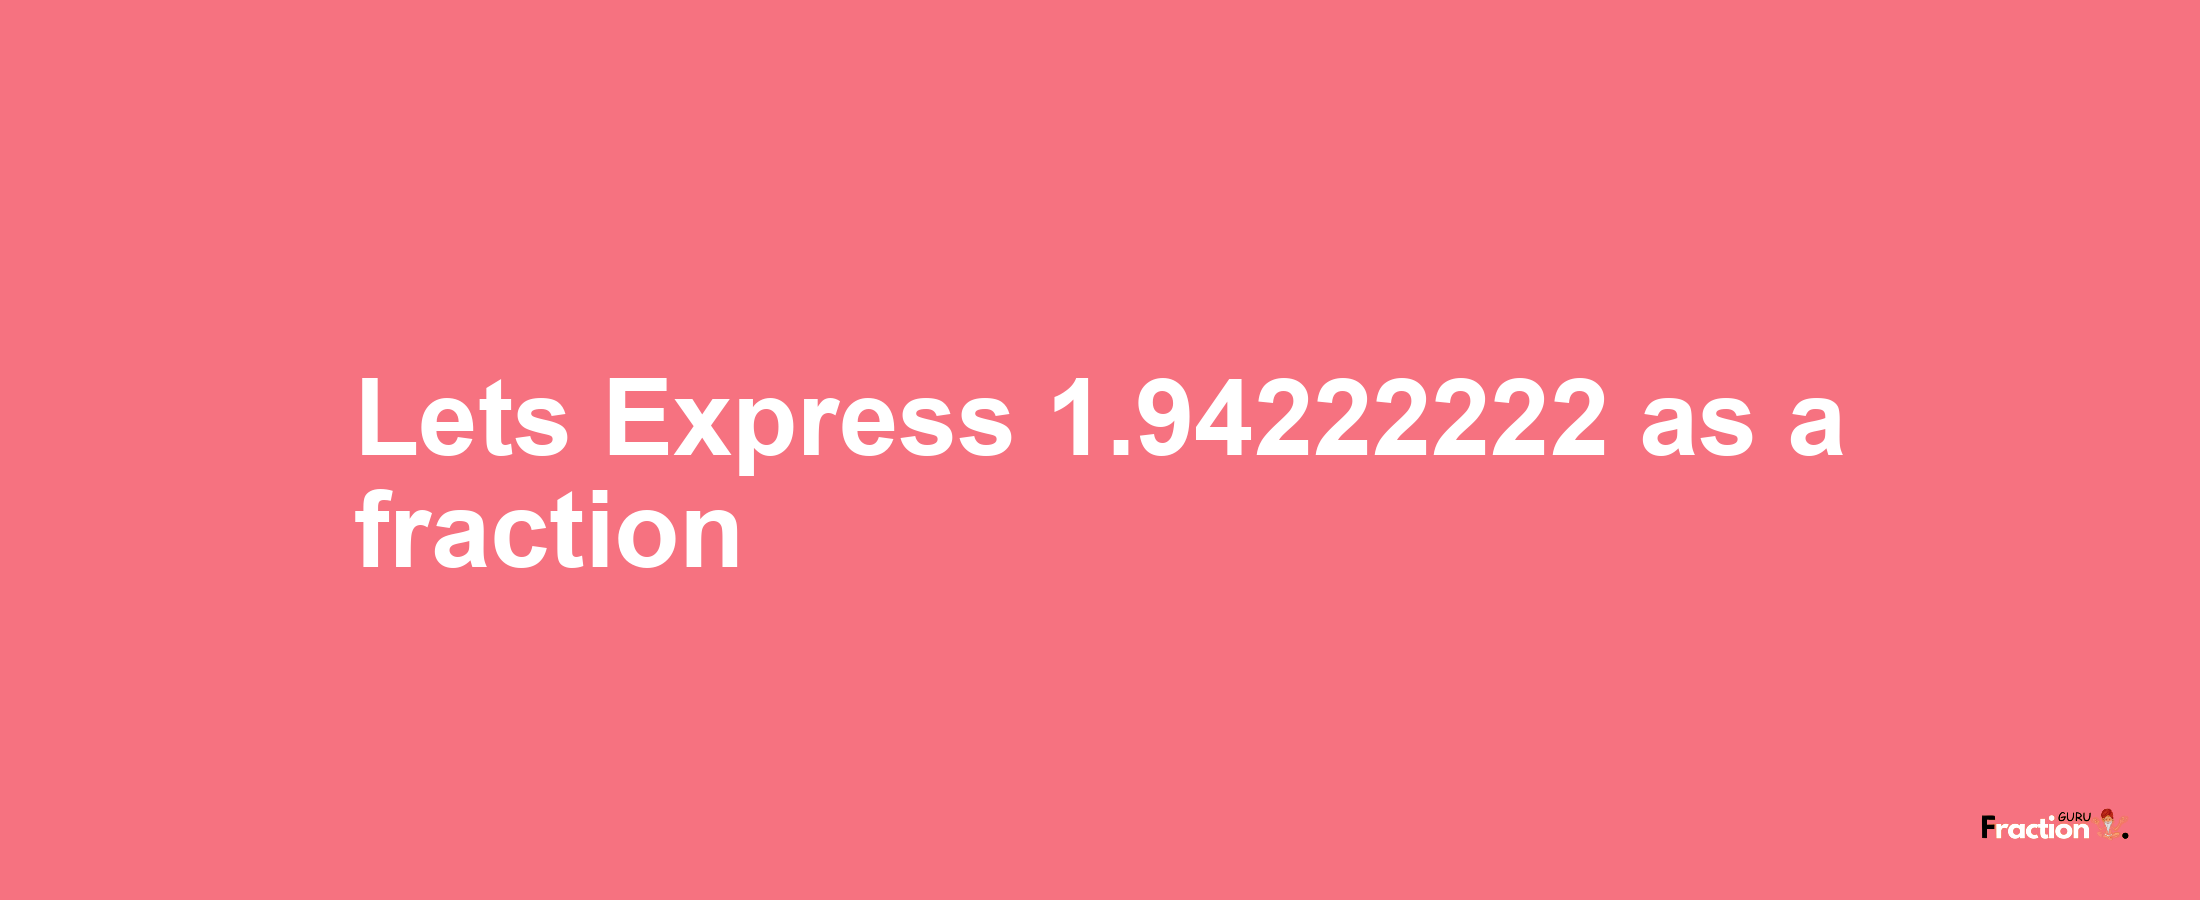 Lets Express 1.94222222 as afraction